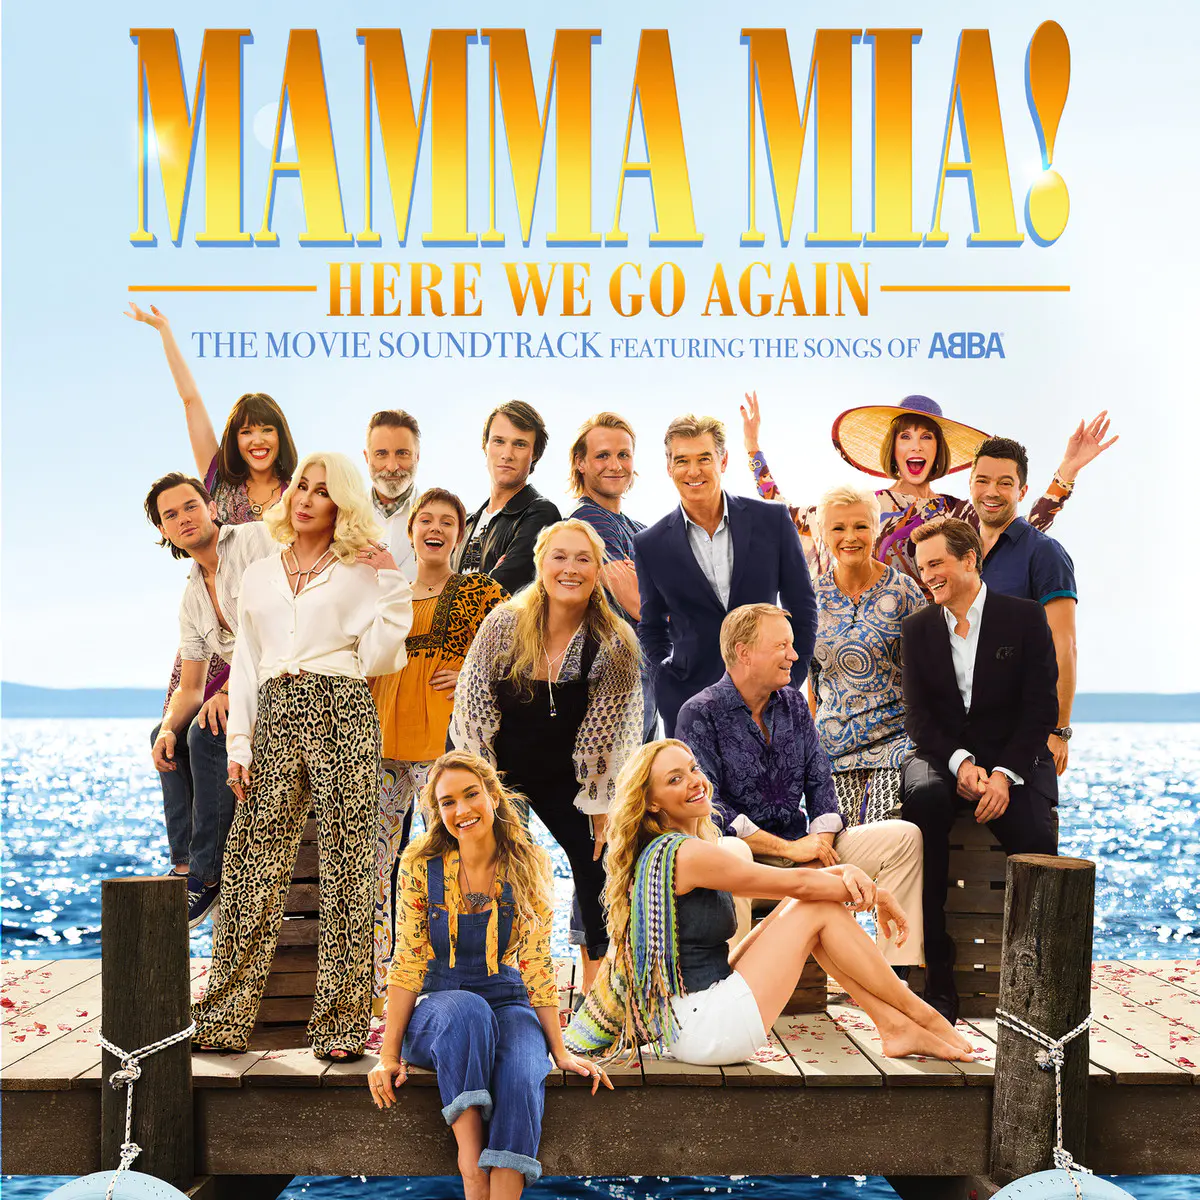 I Ve Been Waiting For You Lyrics In English Mamma Mia Here We Go Again Original Motion Picture Soundtrack I Ve Been Waiting For You Song Lyrics In English Free Online On Gaana Com